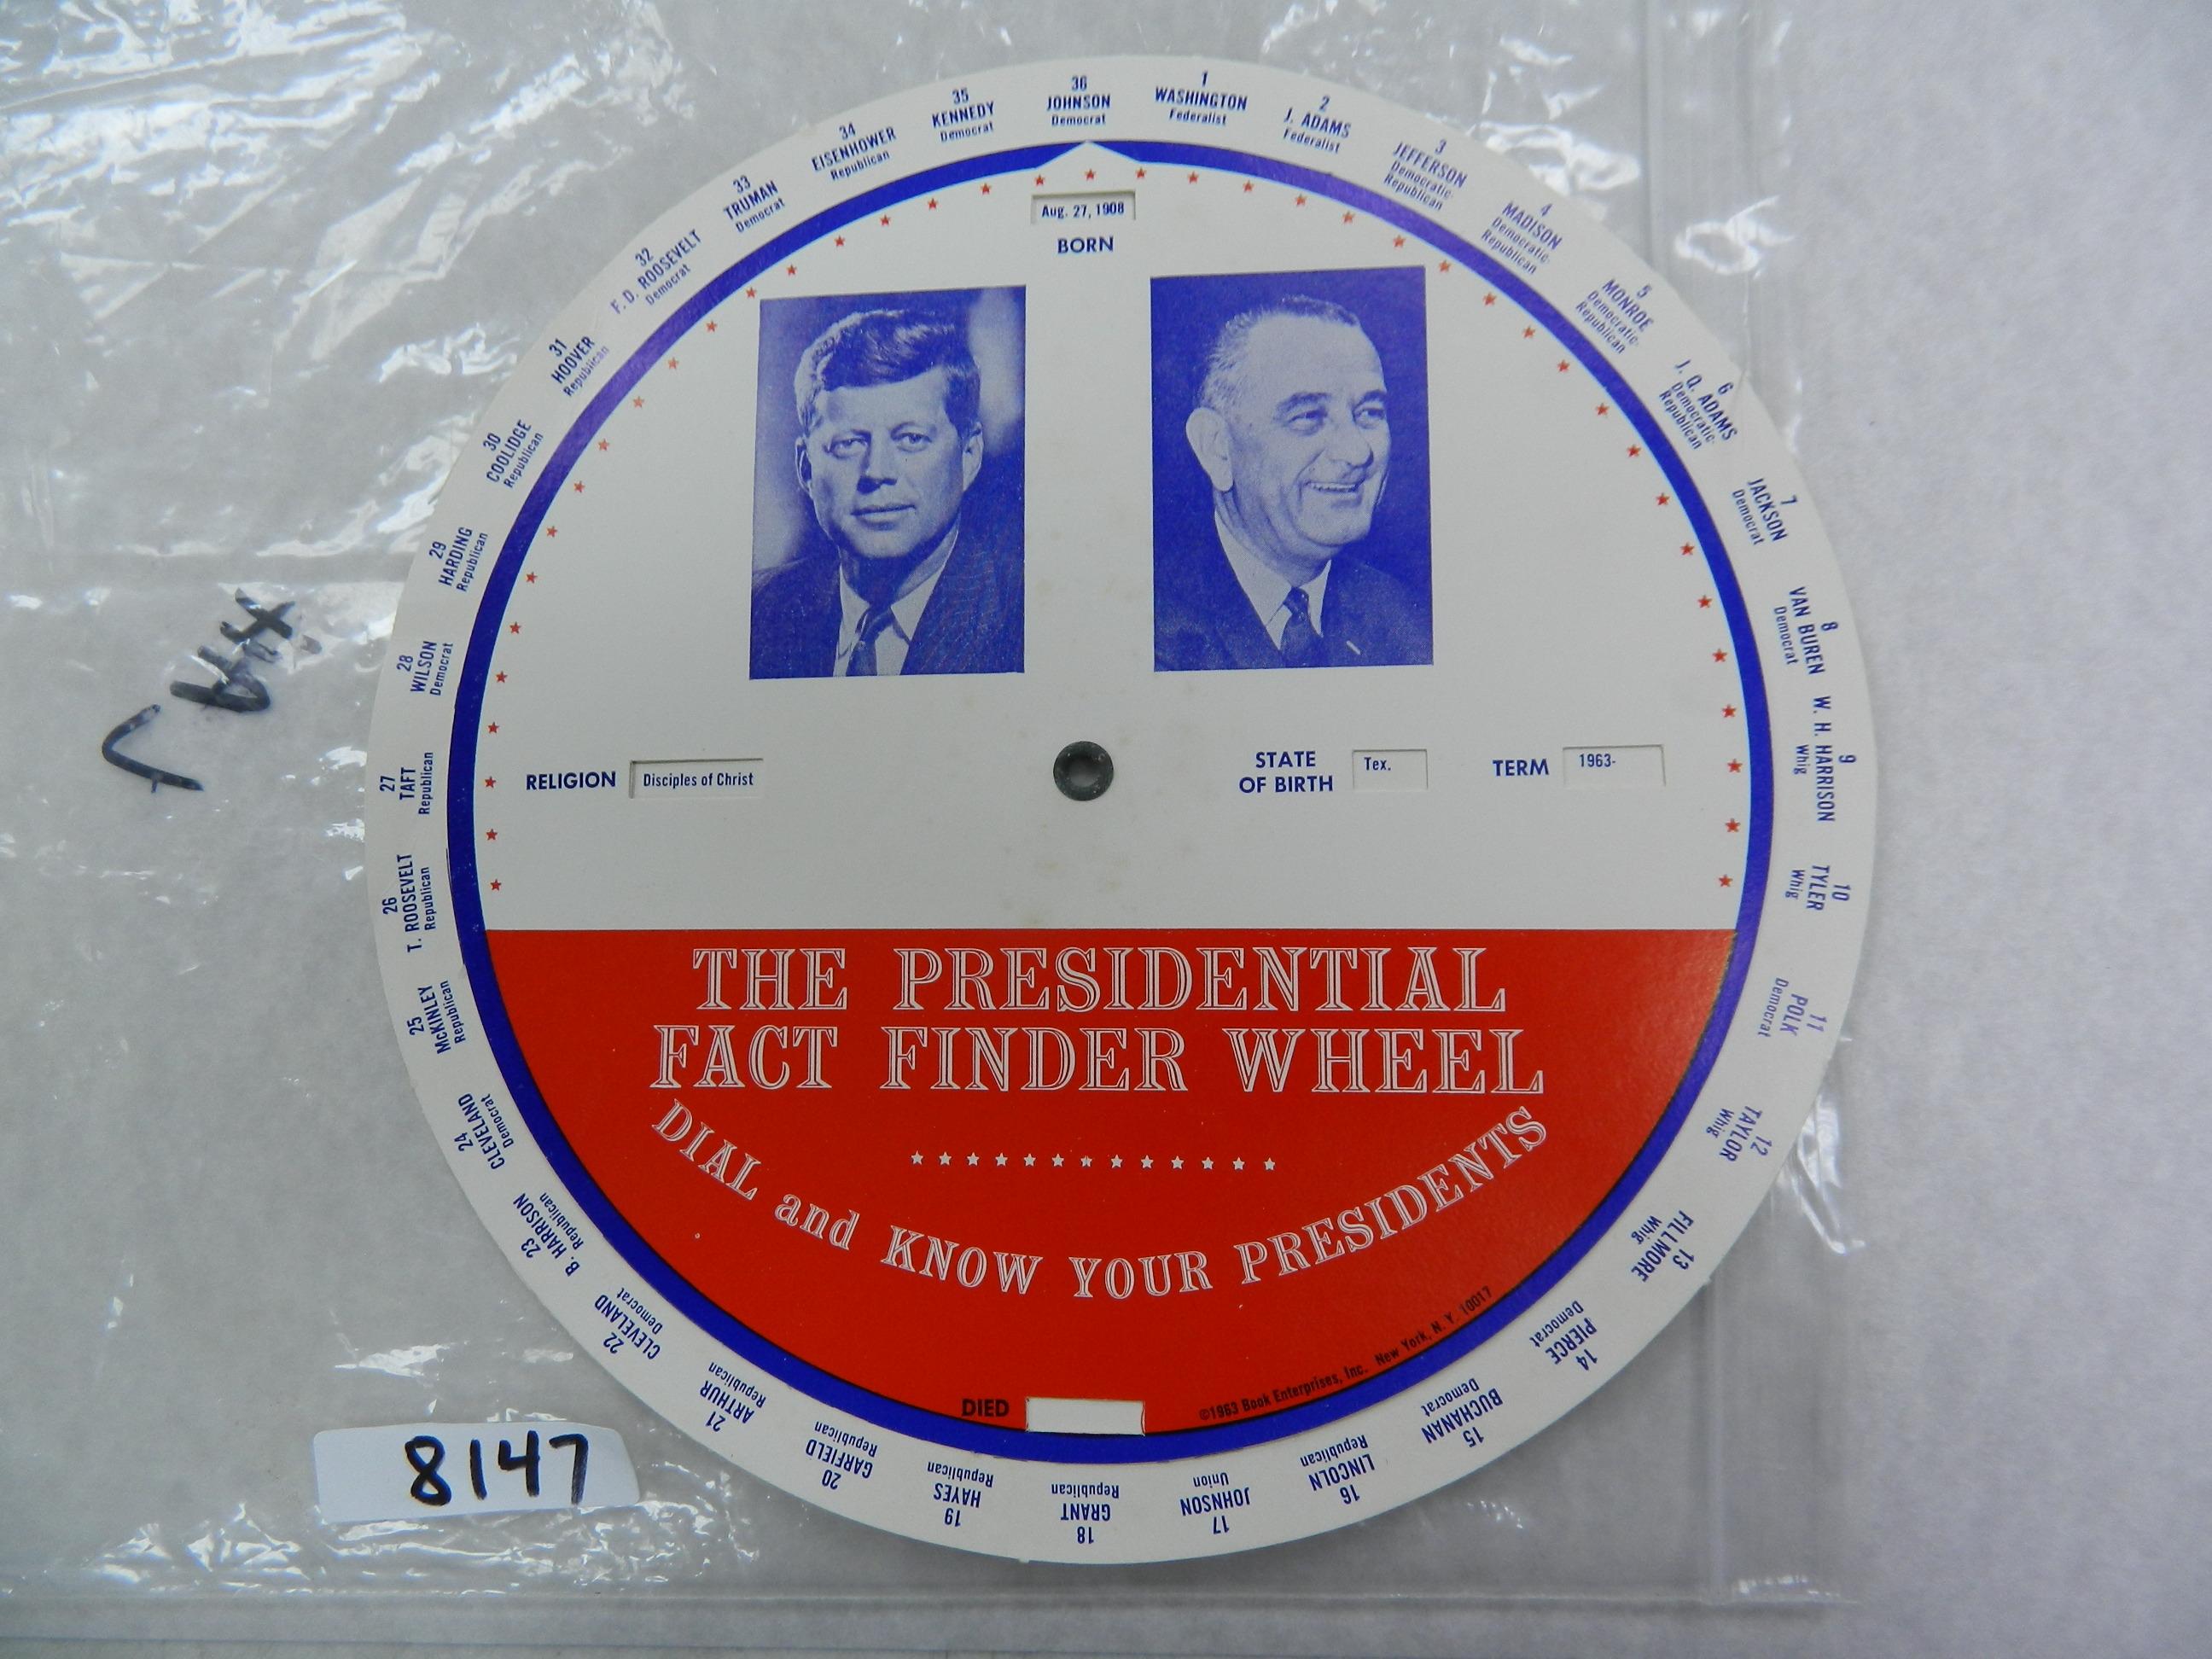 1963 Presidential Fact Finder, Dial and know your presidents, stops at LBJ. 8" Round